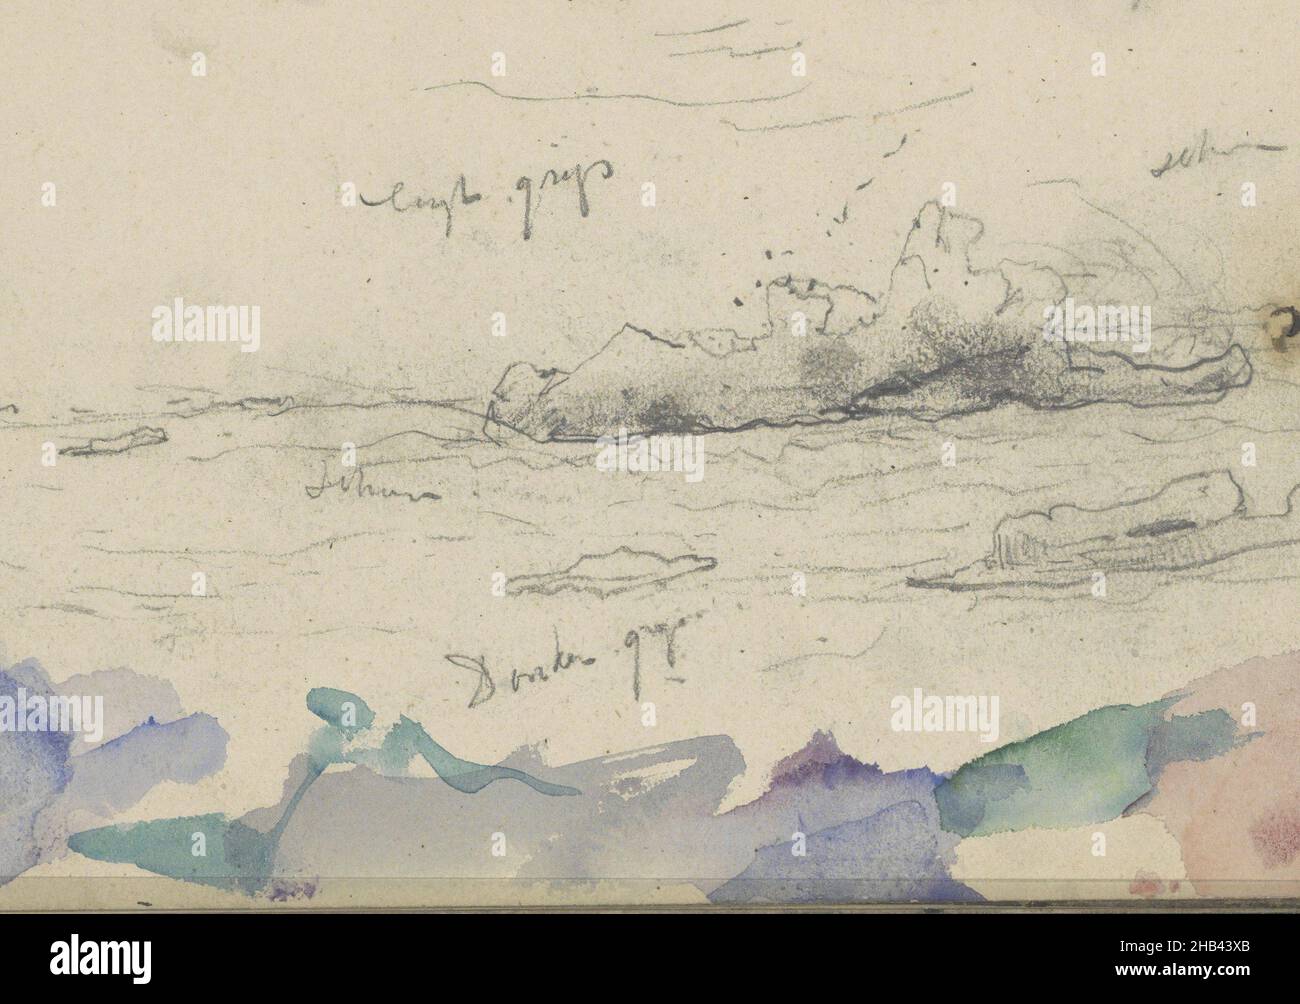 Sheet 8 recto from a sketchbook with 35 pages meant during the expedition to Nova Zembla in 1880, View of the Barents Sea with ice floes and an iceberg., Louis Apol, 1880 Stock Photo